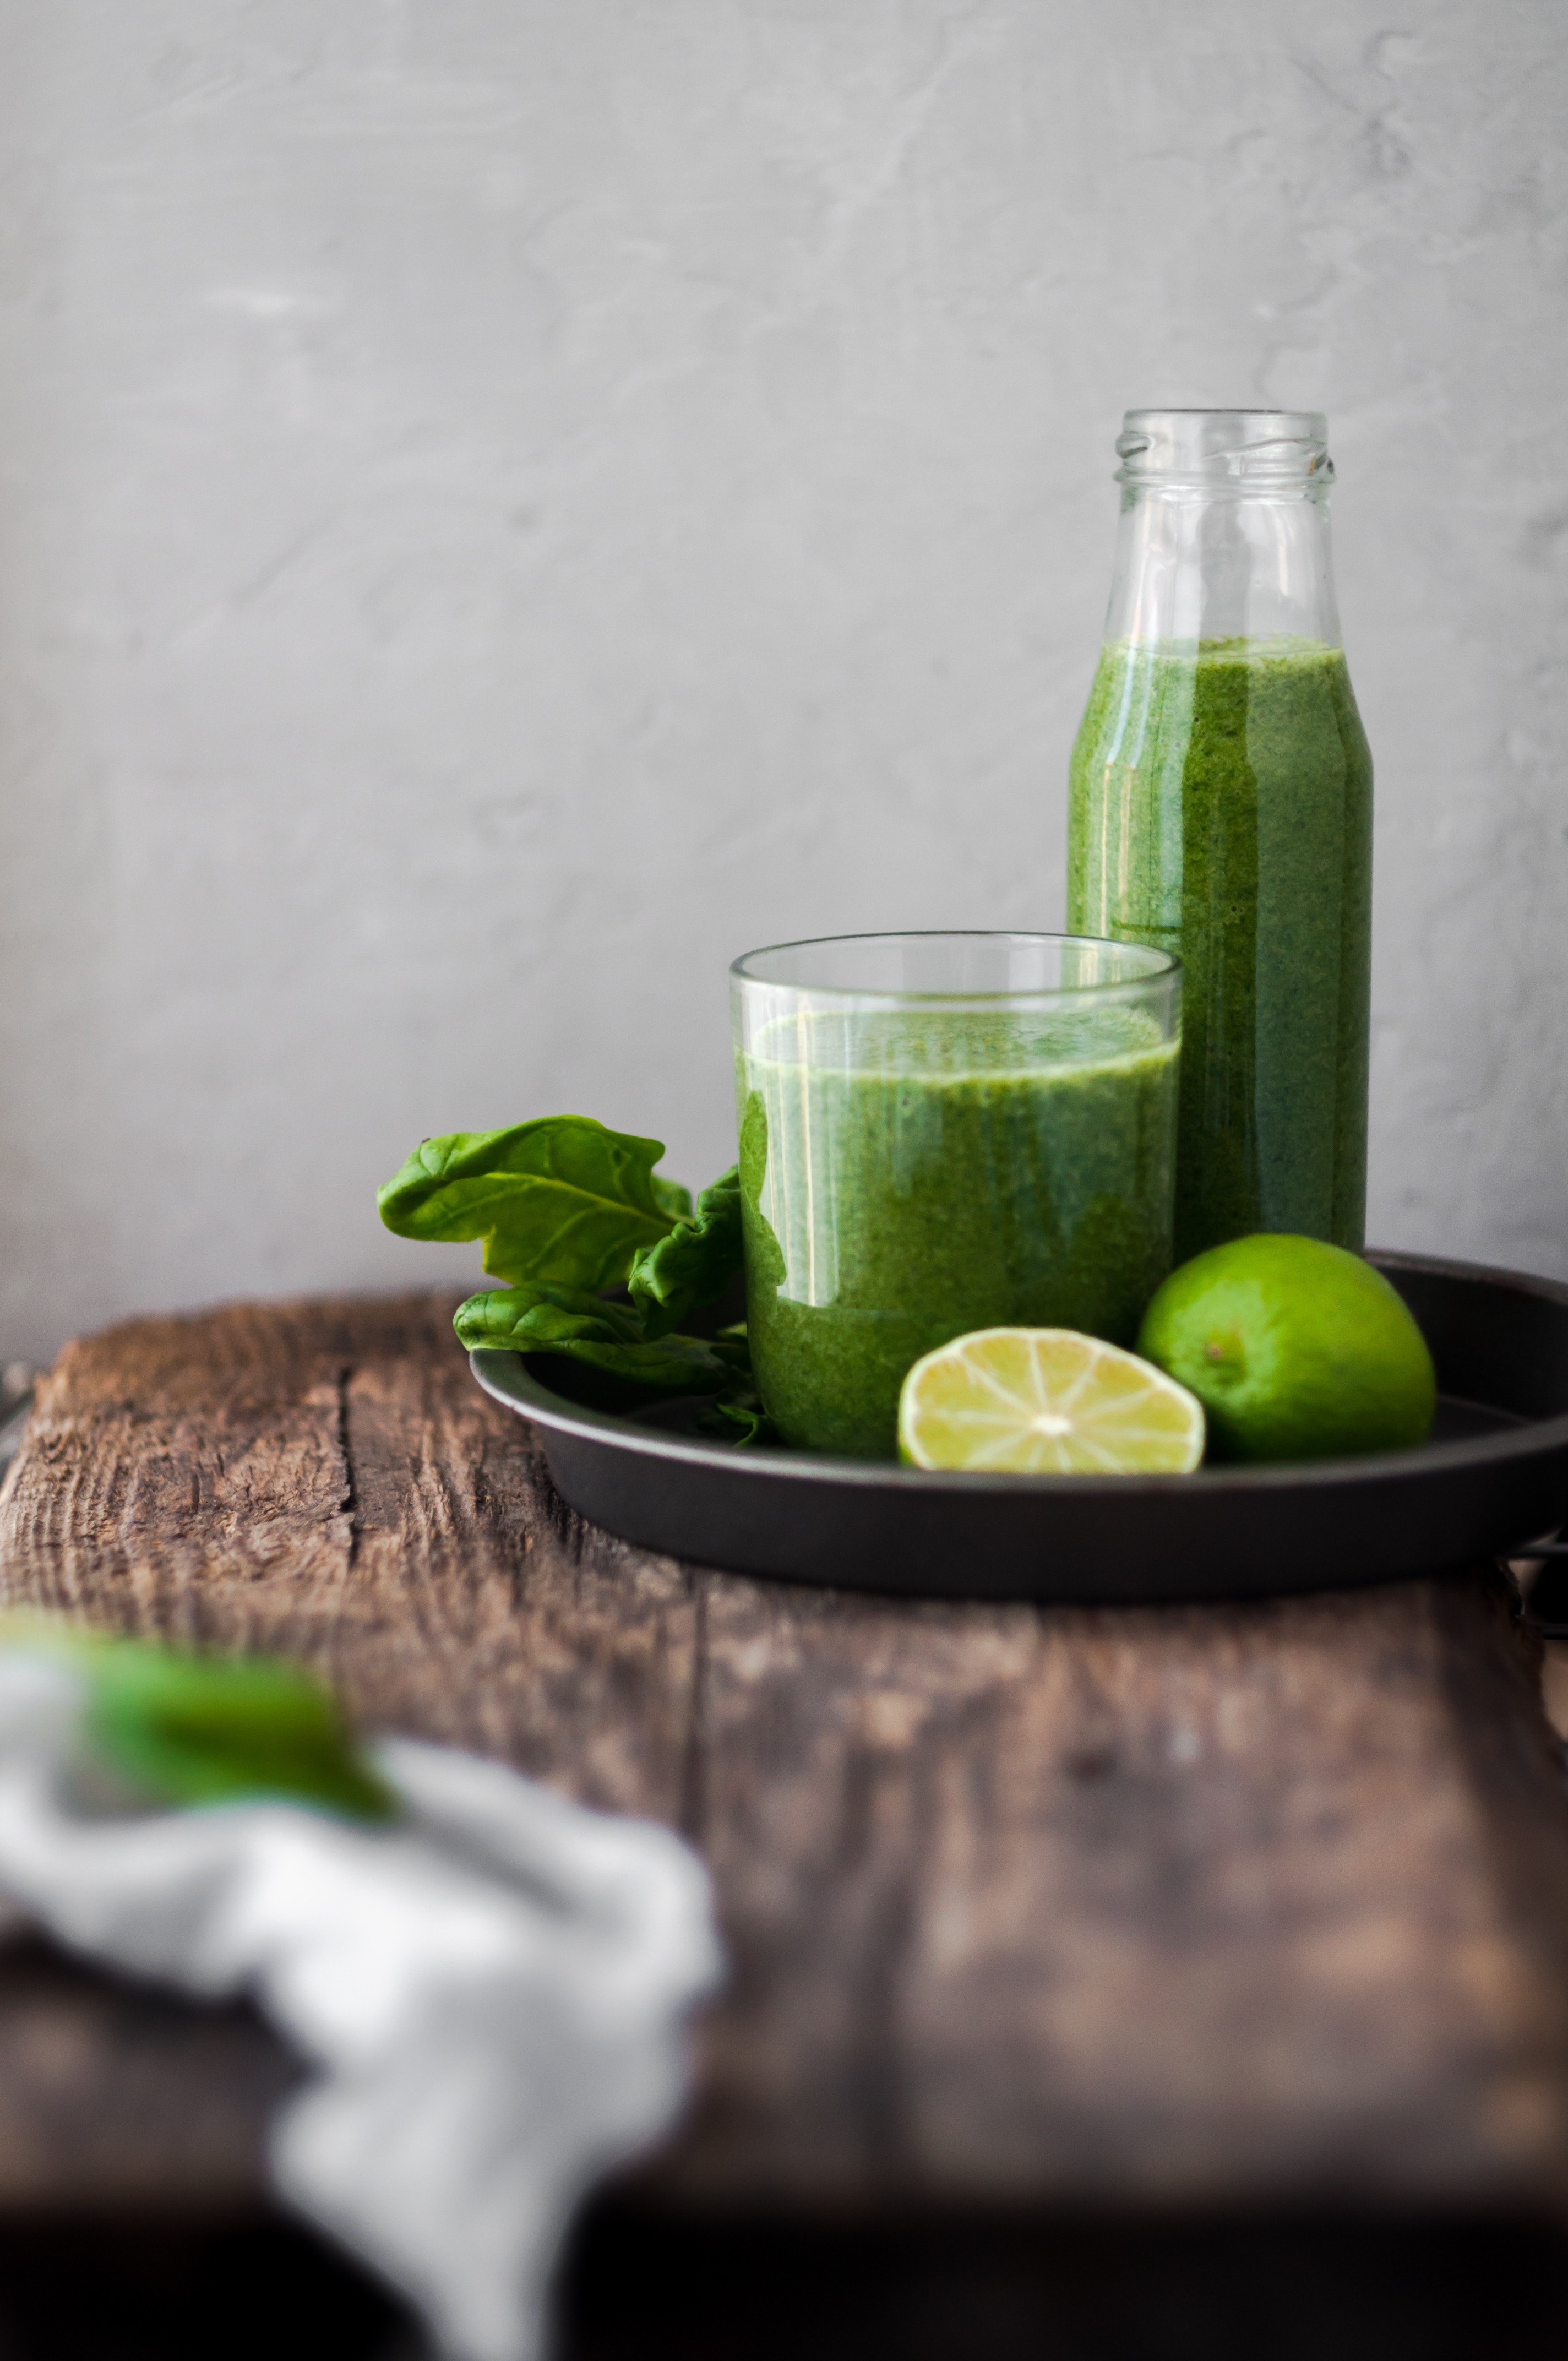 Top 10 Healthy Reasons to Drink Green Smoothies